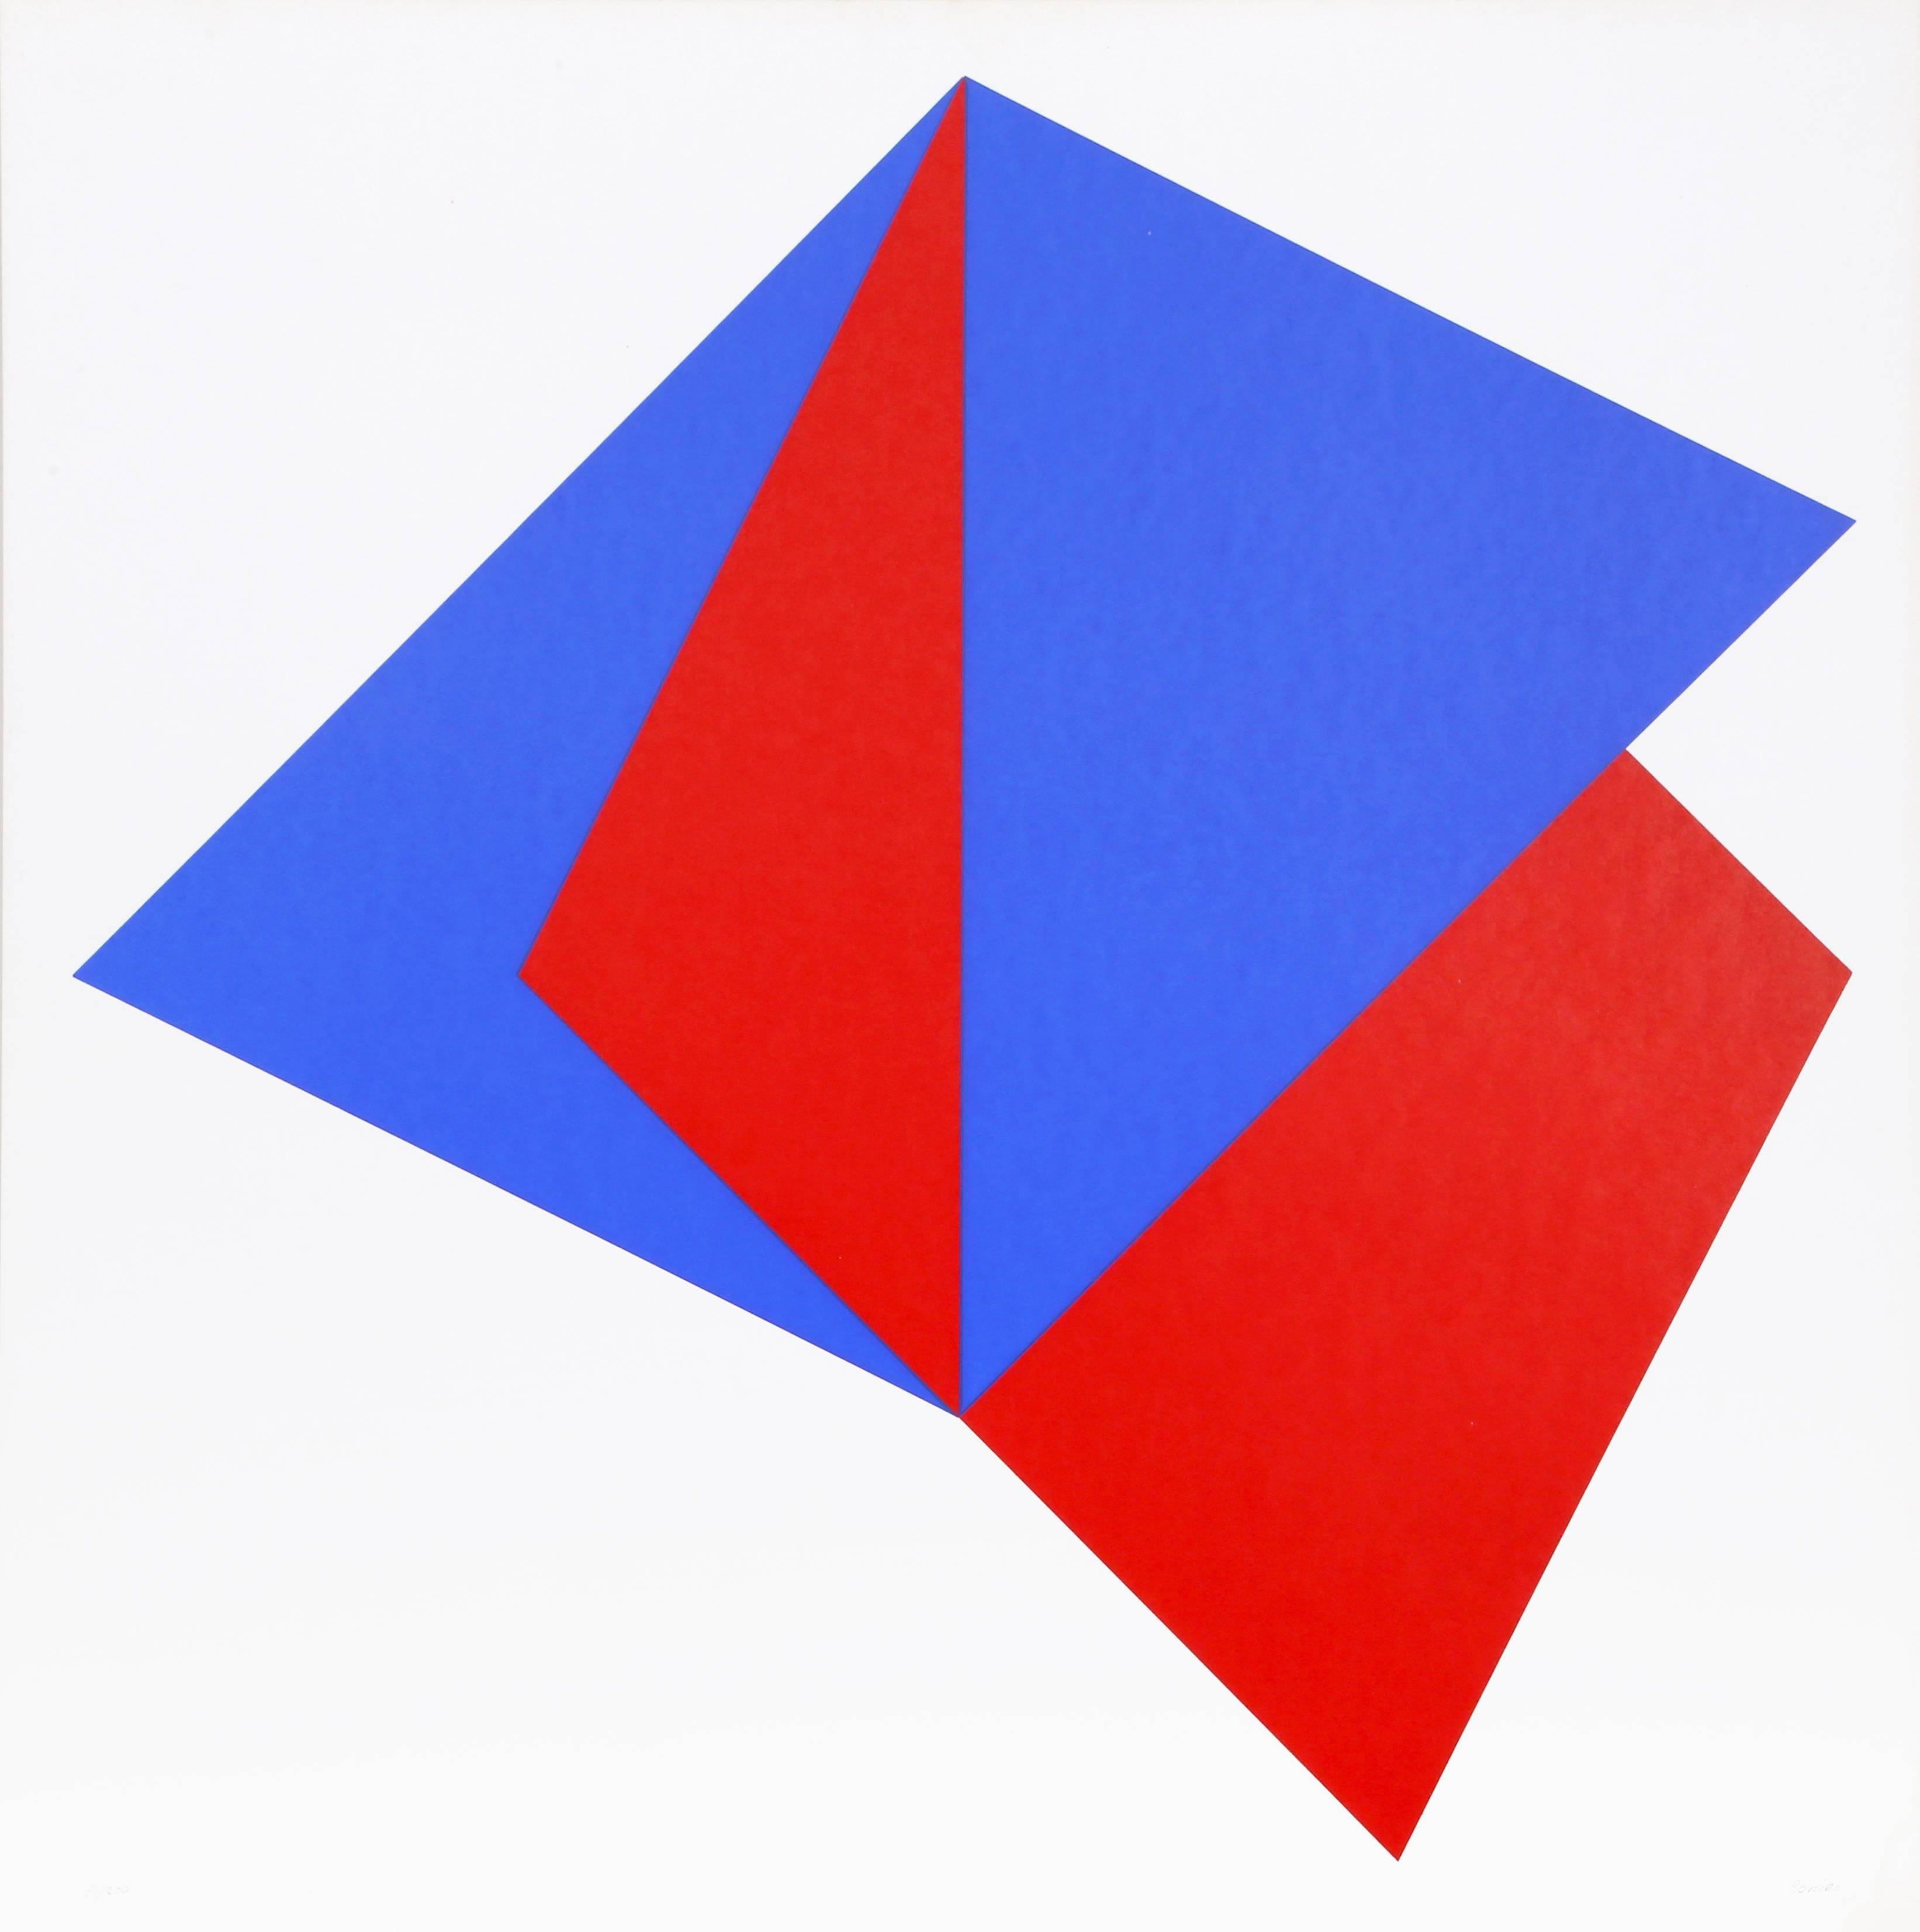 Untitled - Composition in Blue and Red I - Print by Bob Bonies